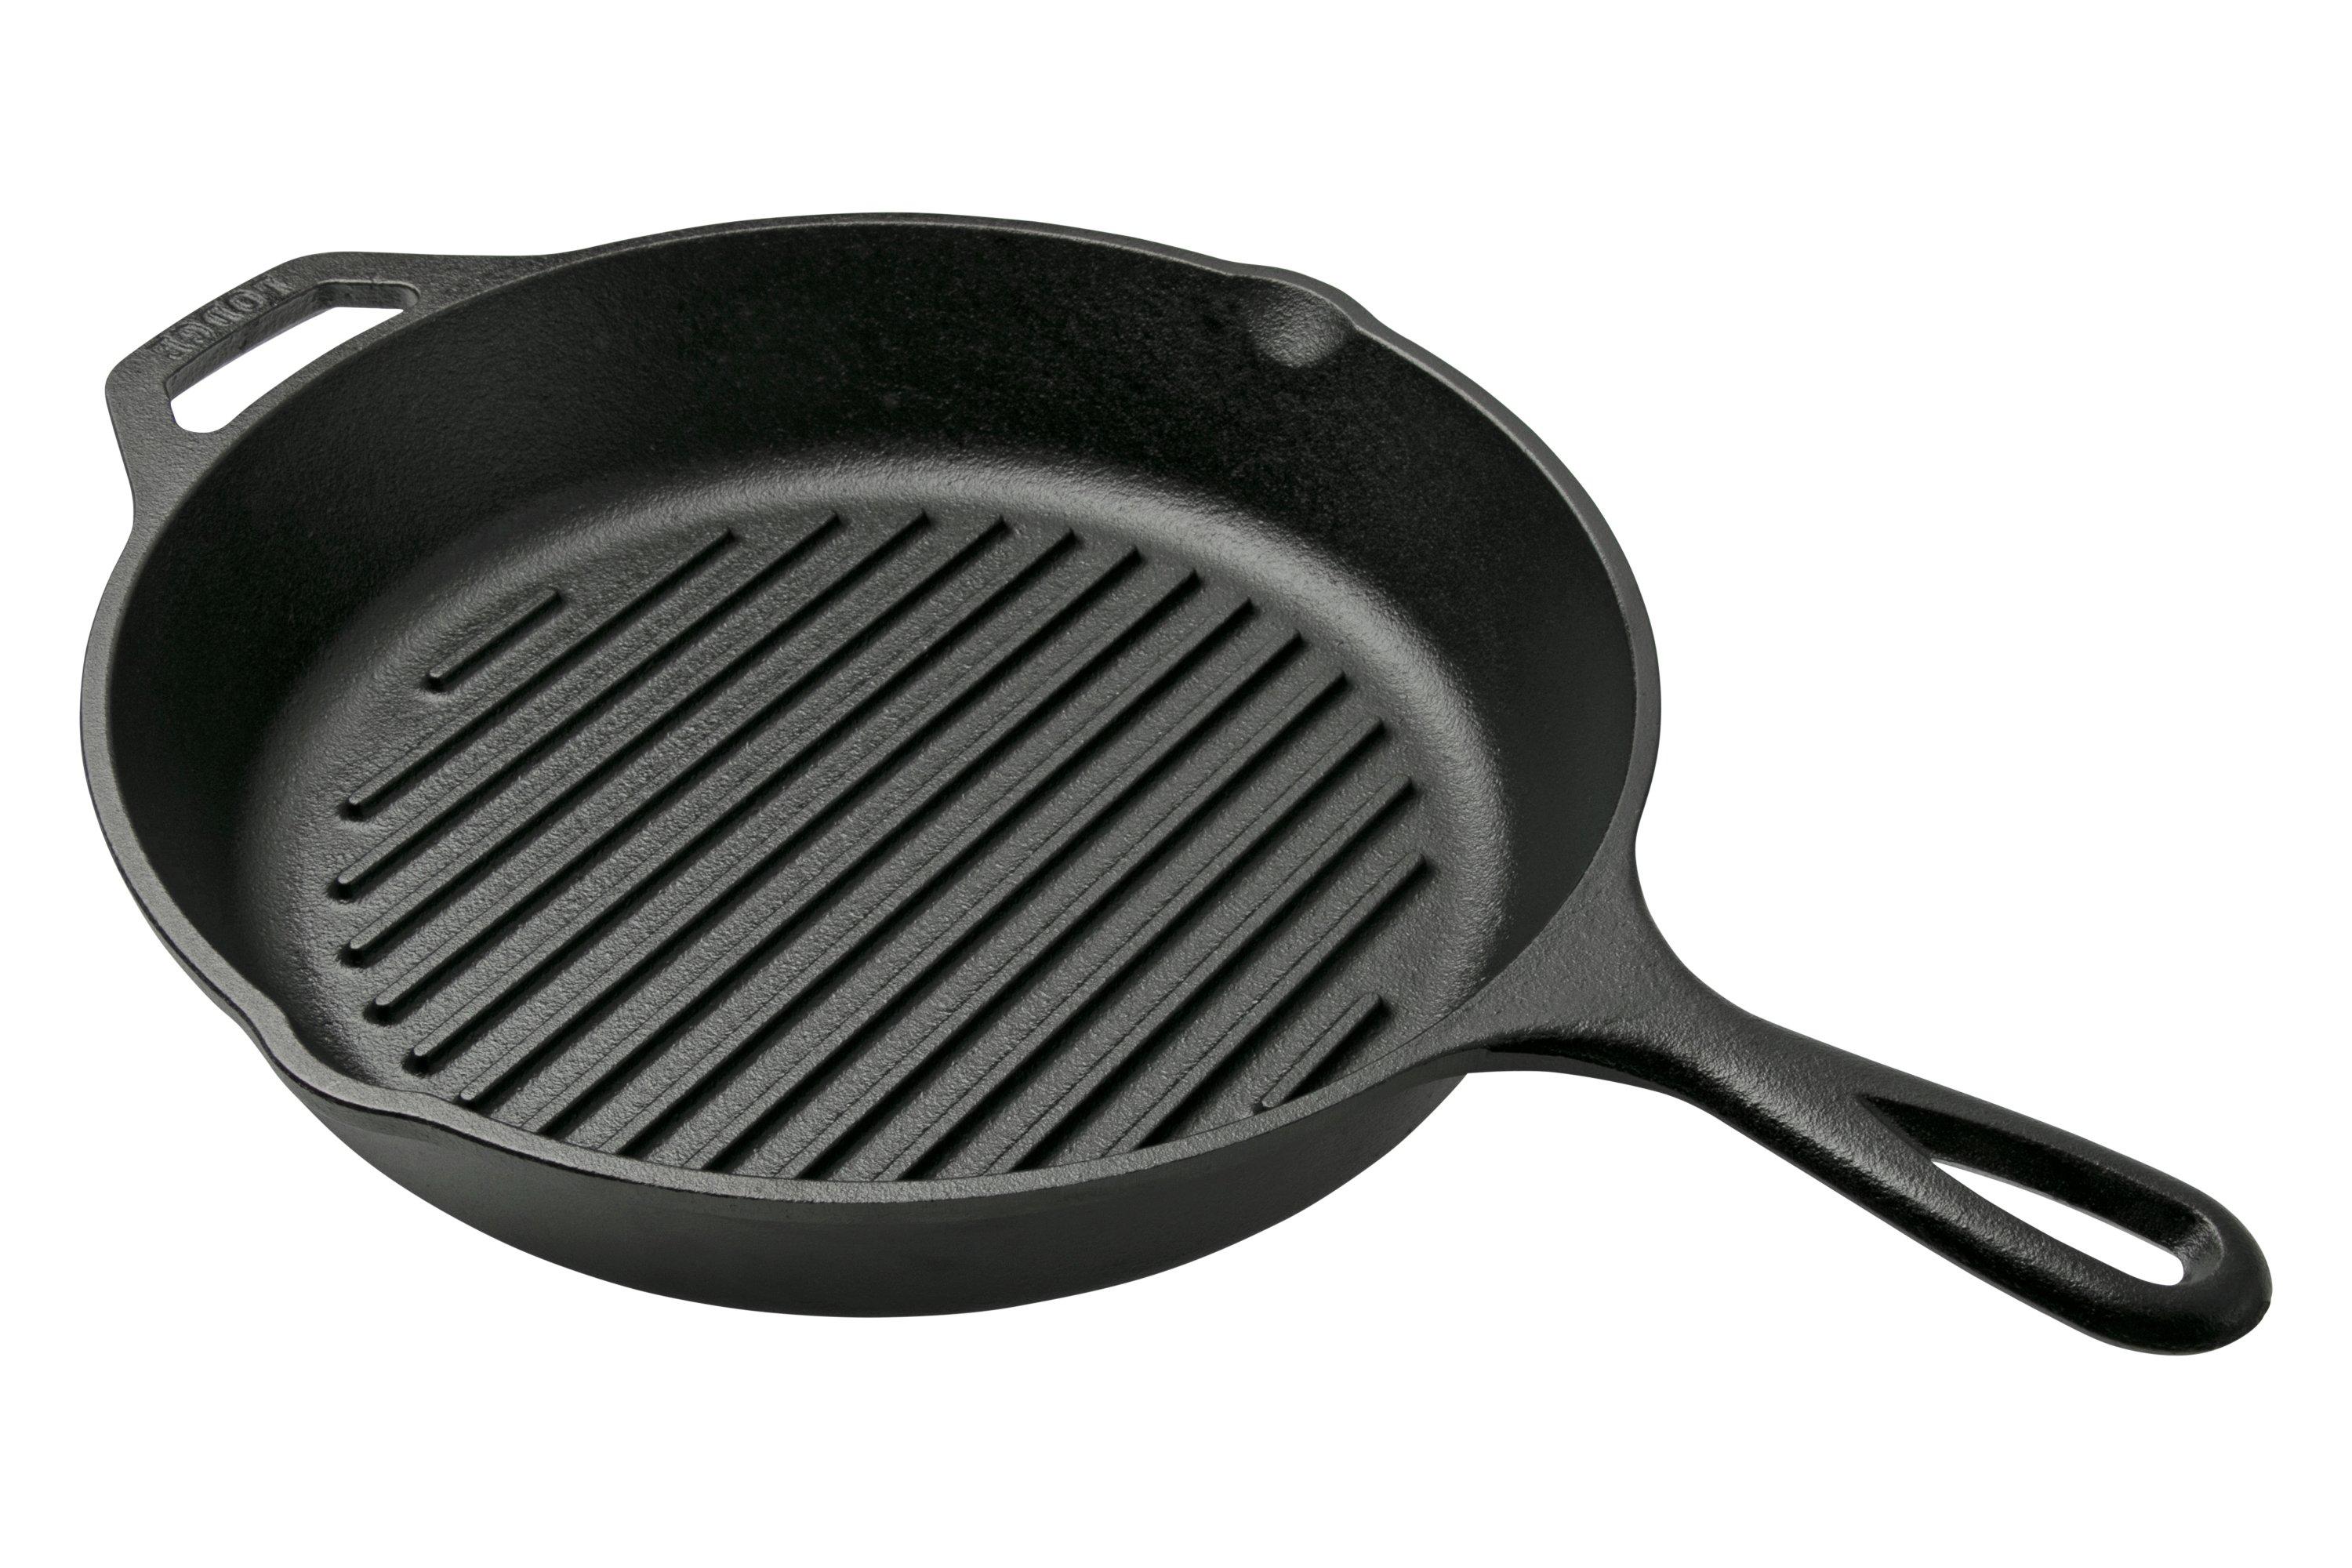 Lodge frying pan/grill pan with two handles L8GPL, diameter approx